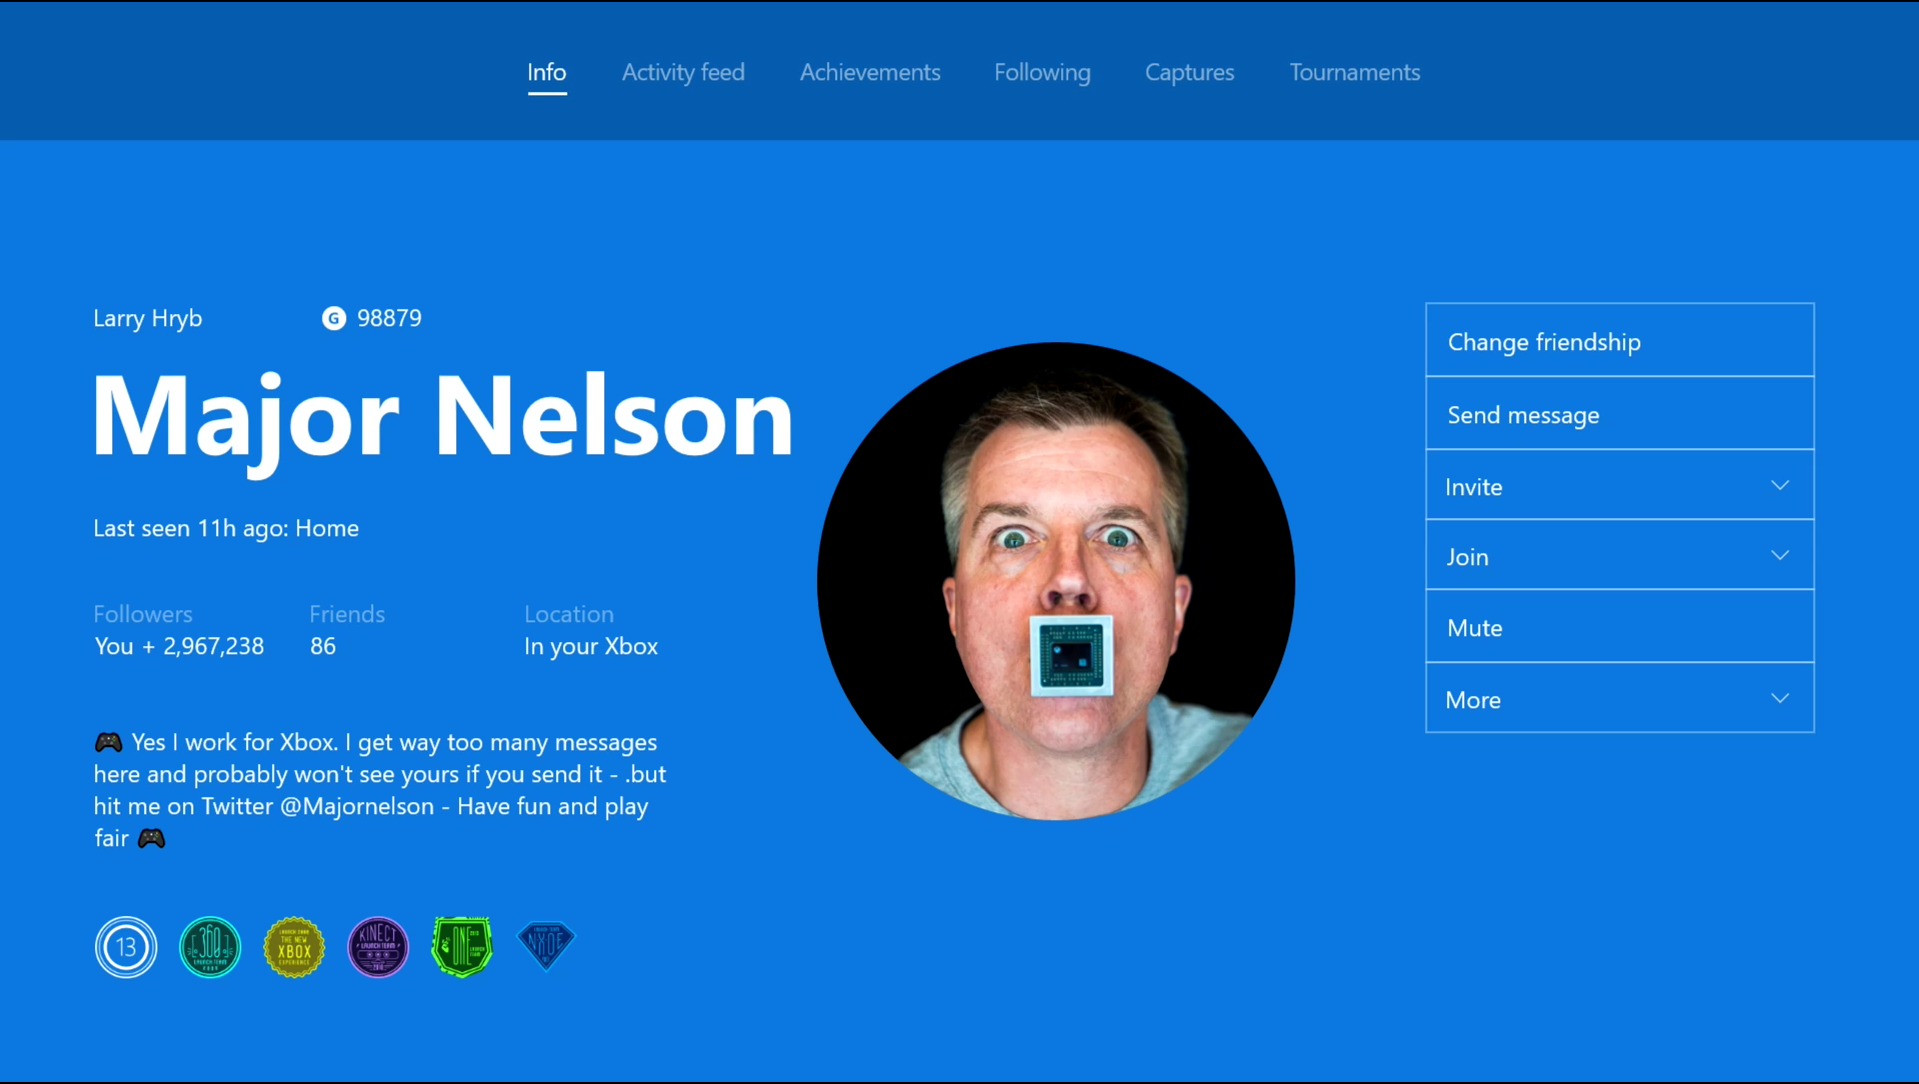 Xbox's Major Nelson shows off the new custom profile picture feature.